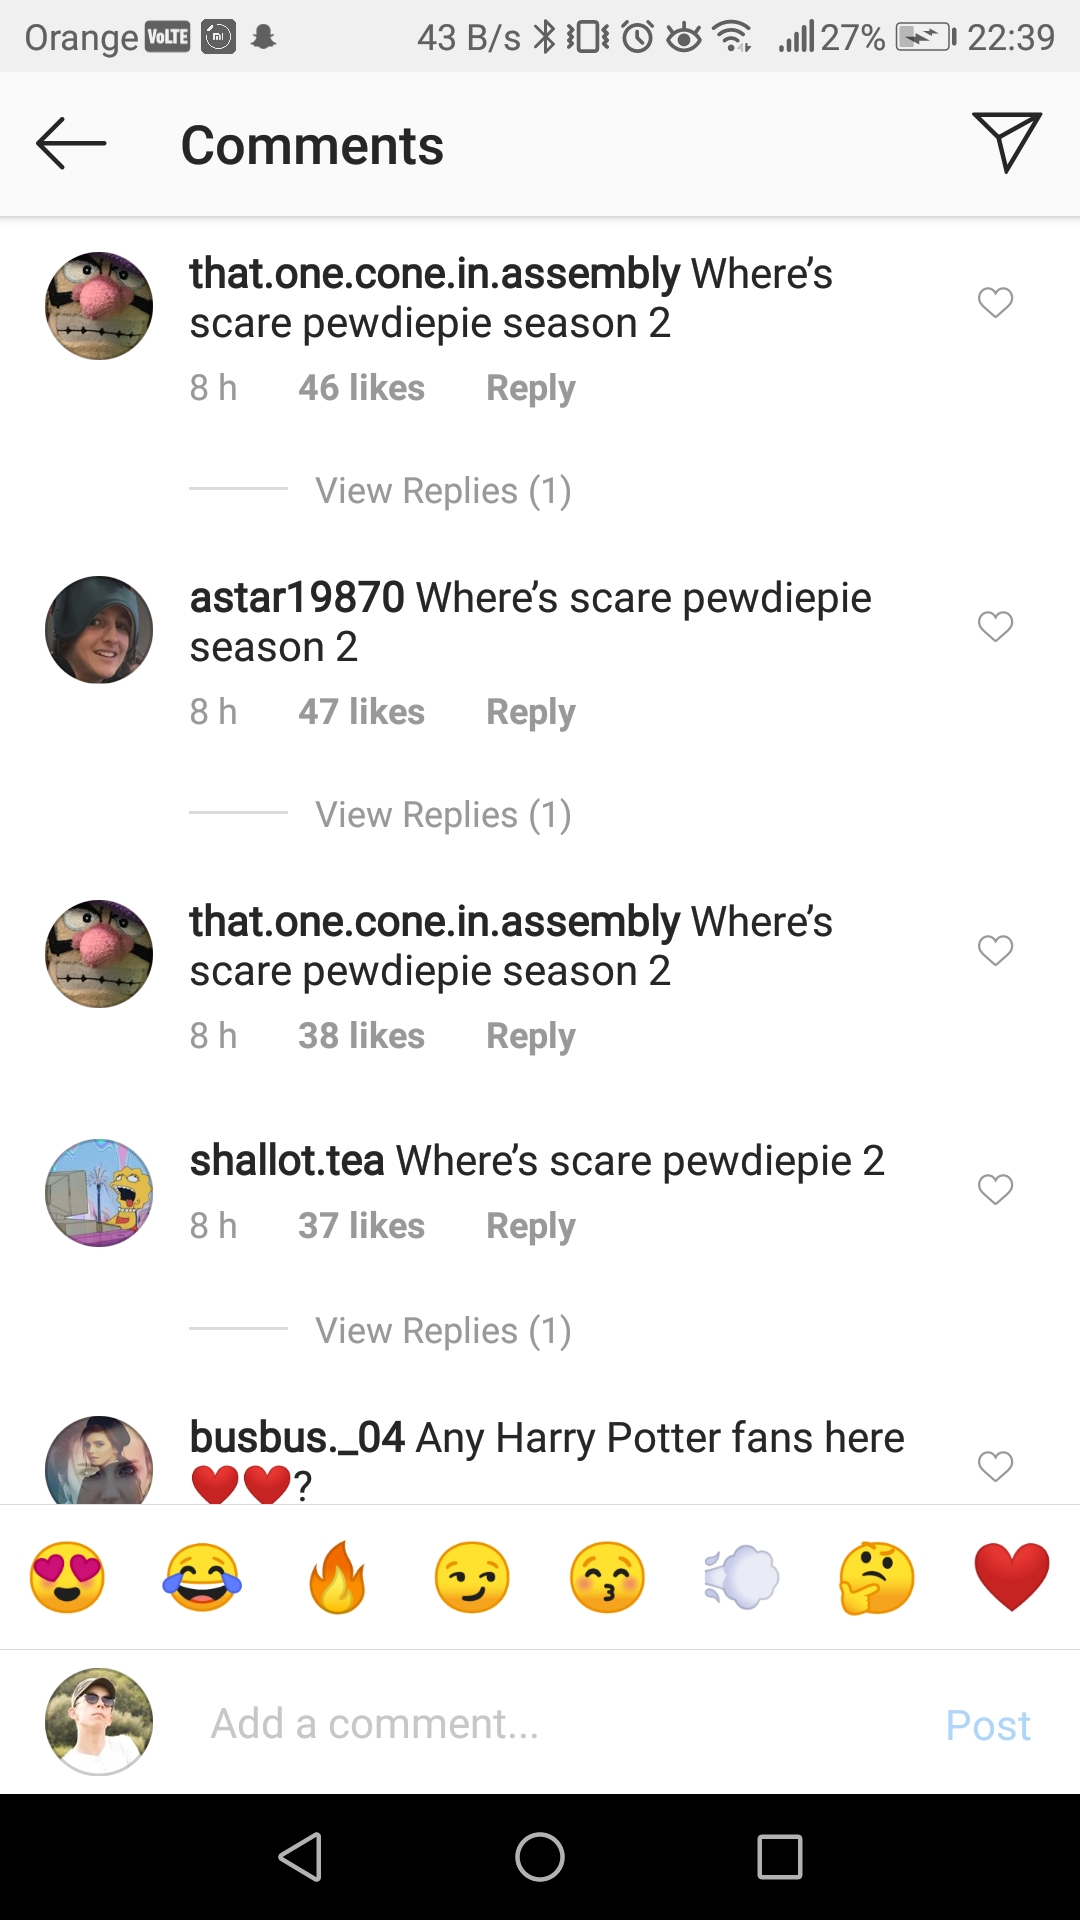 comments about pewdiepie on IG post example